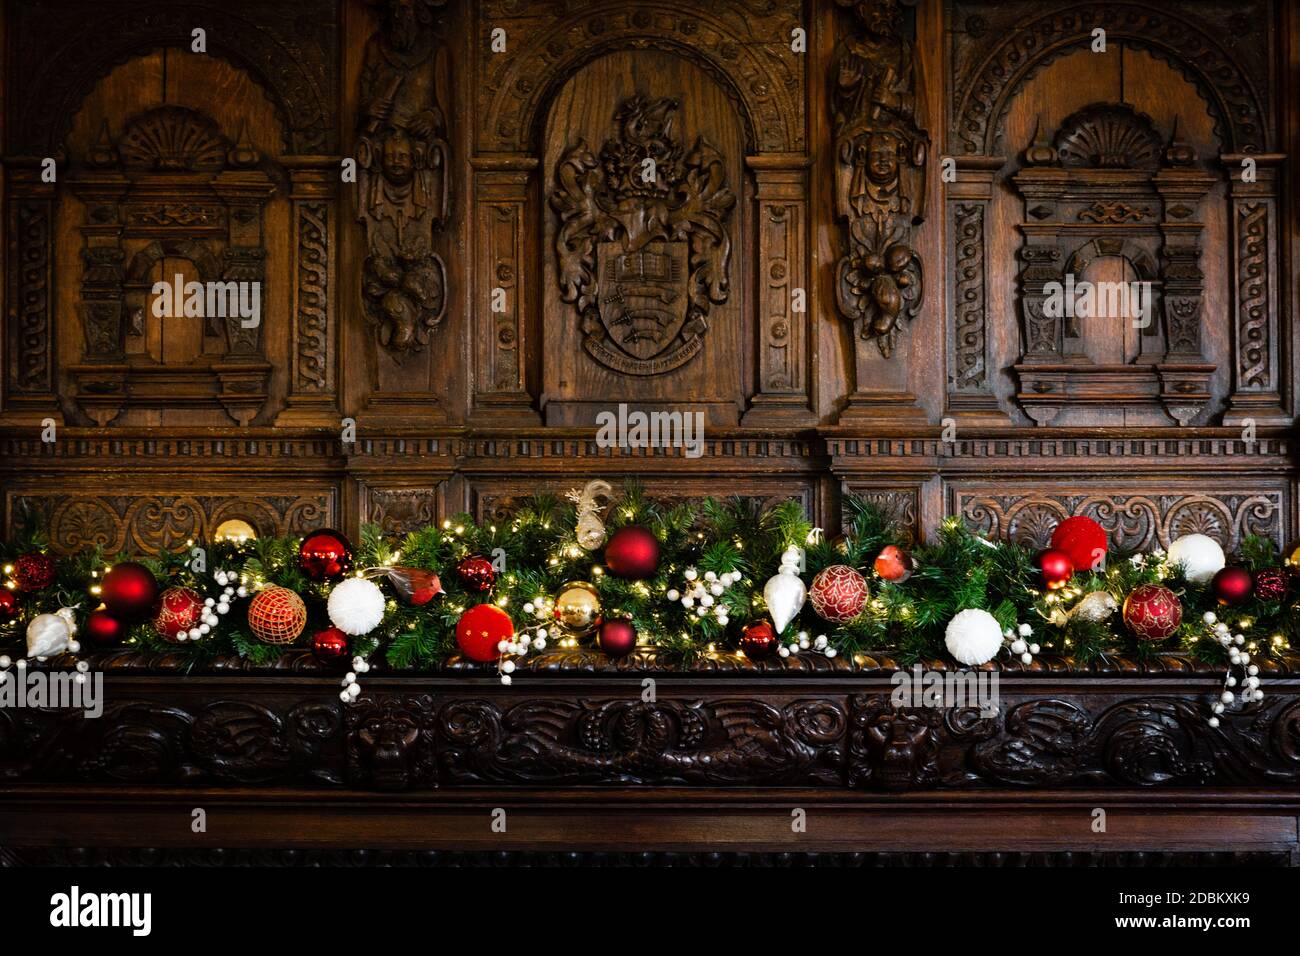 A beautiful traditional wooden fire surround with intricate carvings adorned with a festive Christmas garland of red, green and golds. Stock Photo